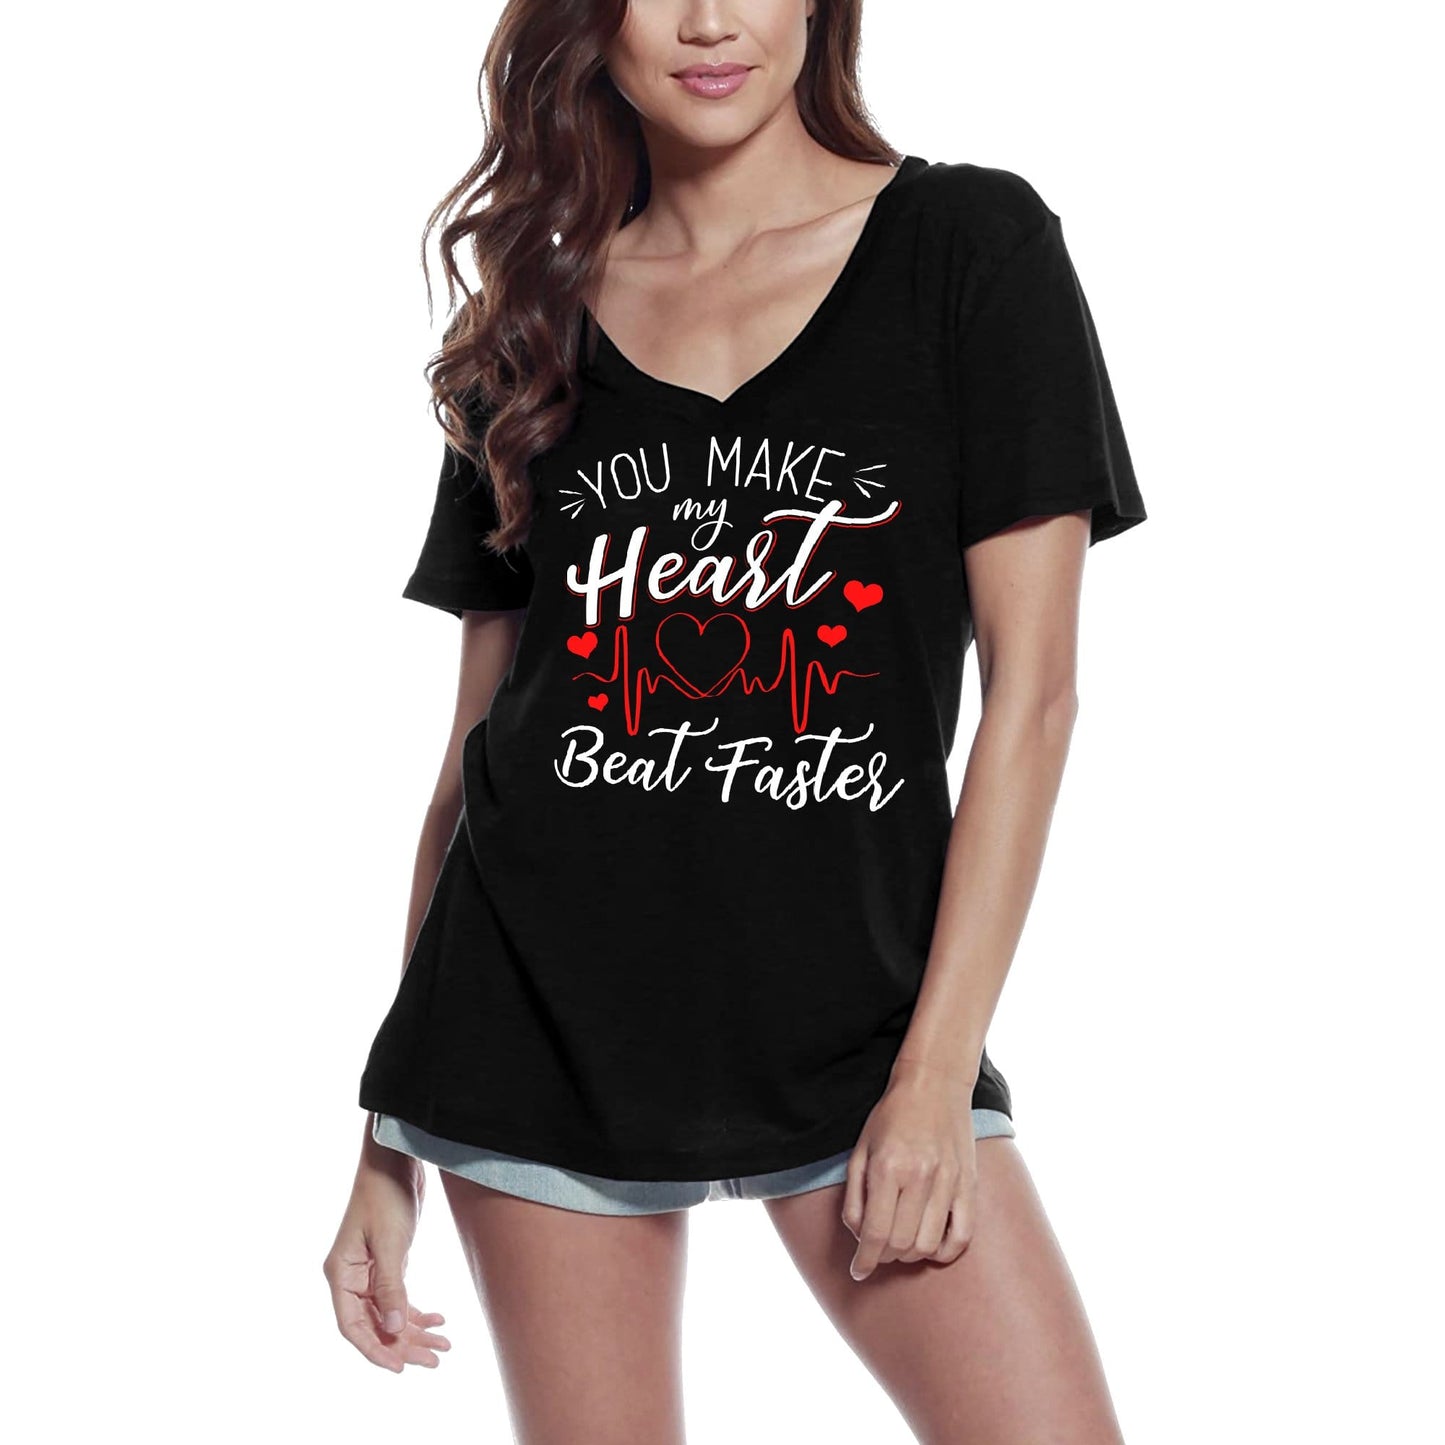 ULTRABASIC Women's T-Shirt You Make My Heart Beat Faster -Valentine's Day Short Sleeve Graphic Tees Tops